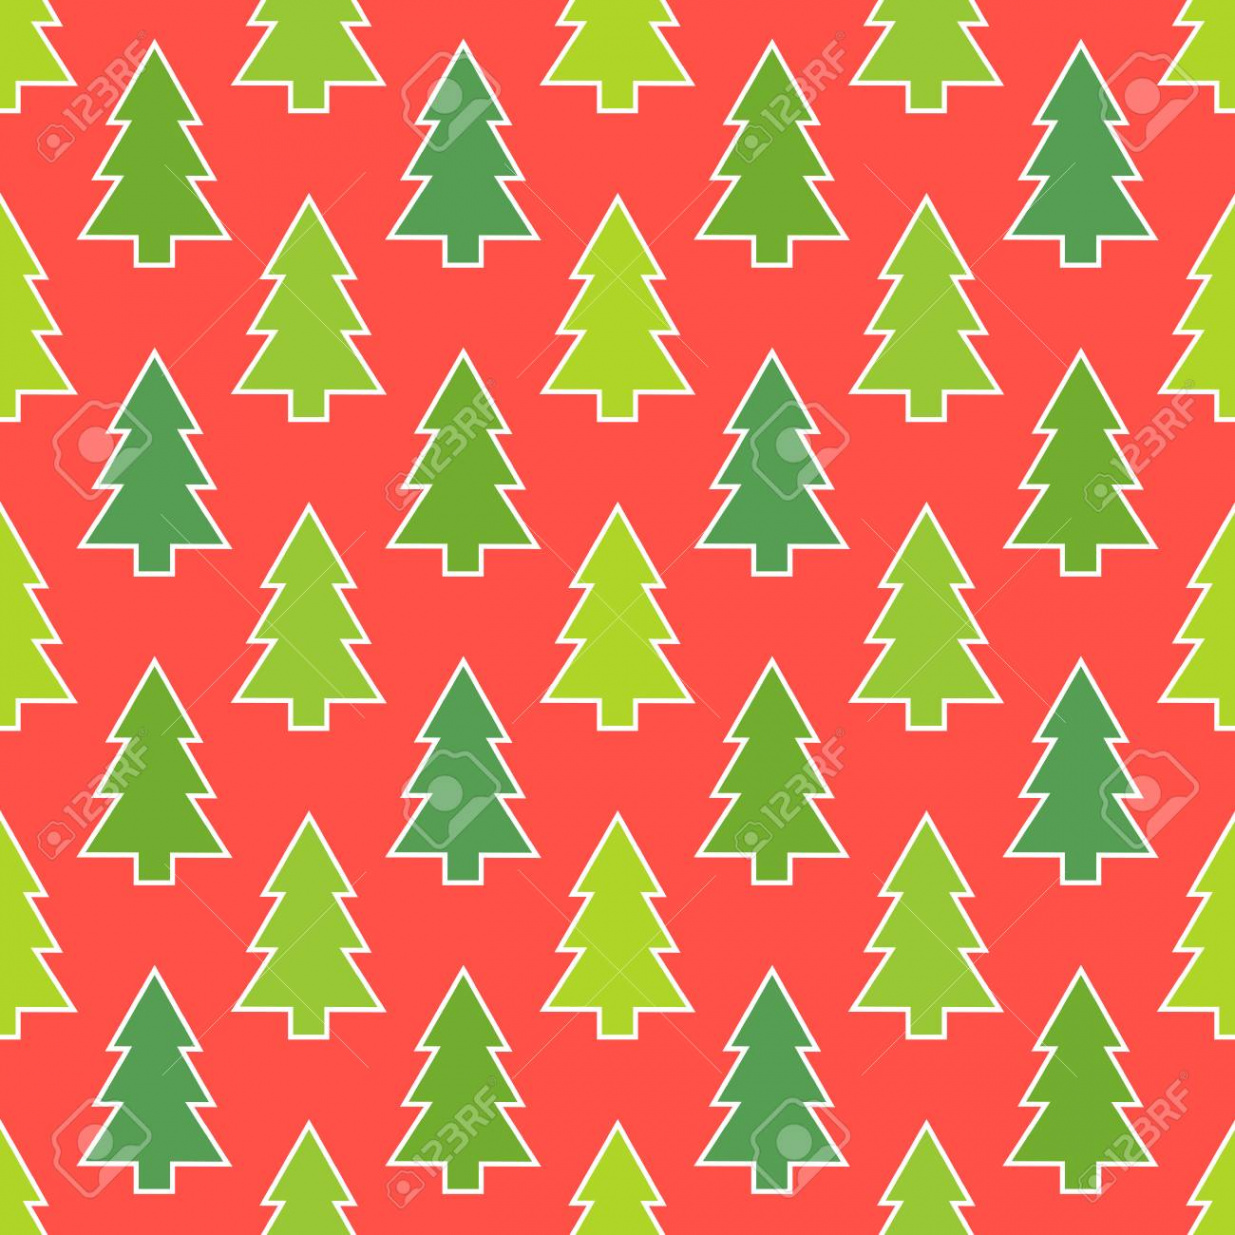 Green Christmas Trees Seamless Pattern On Red Background